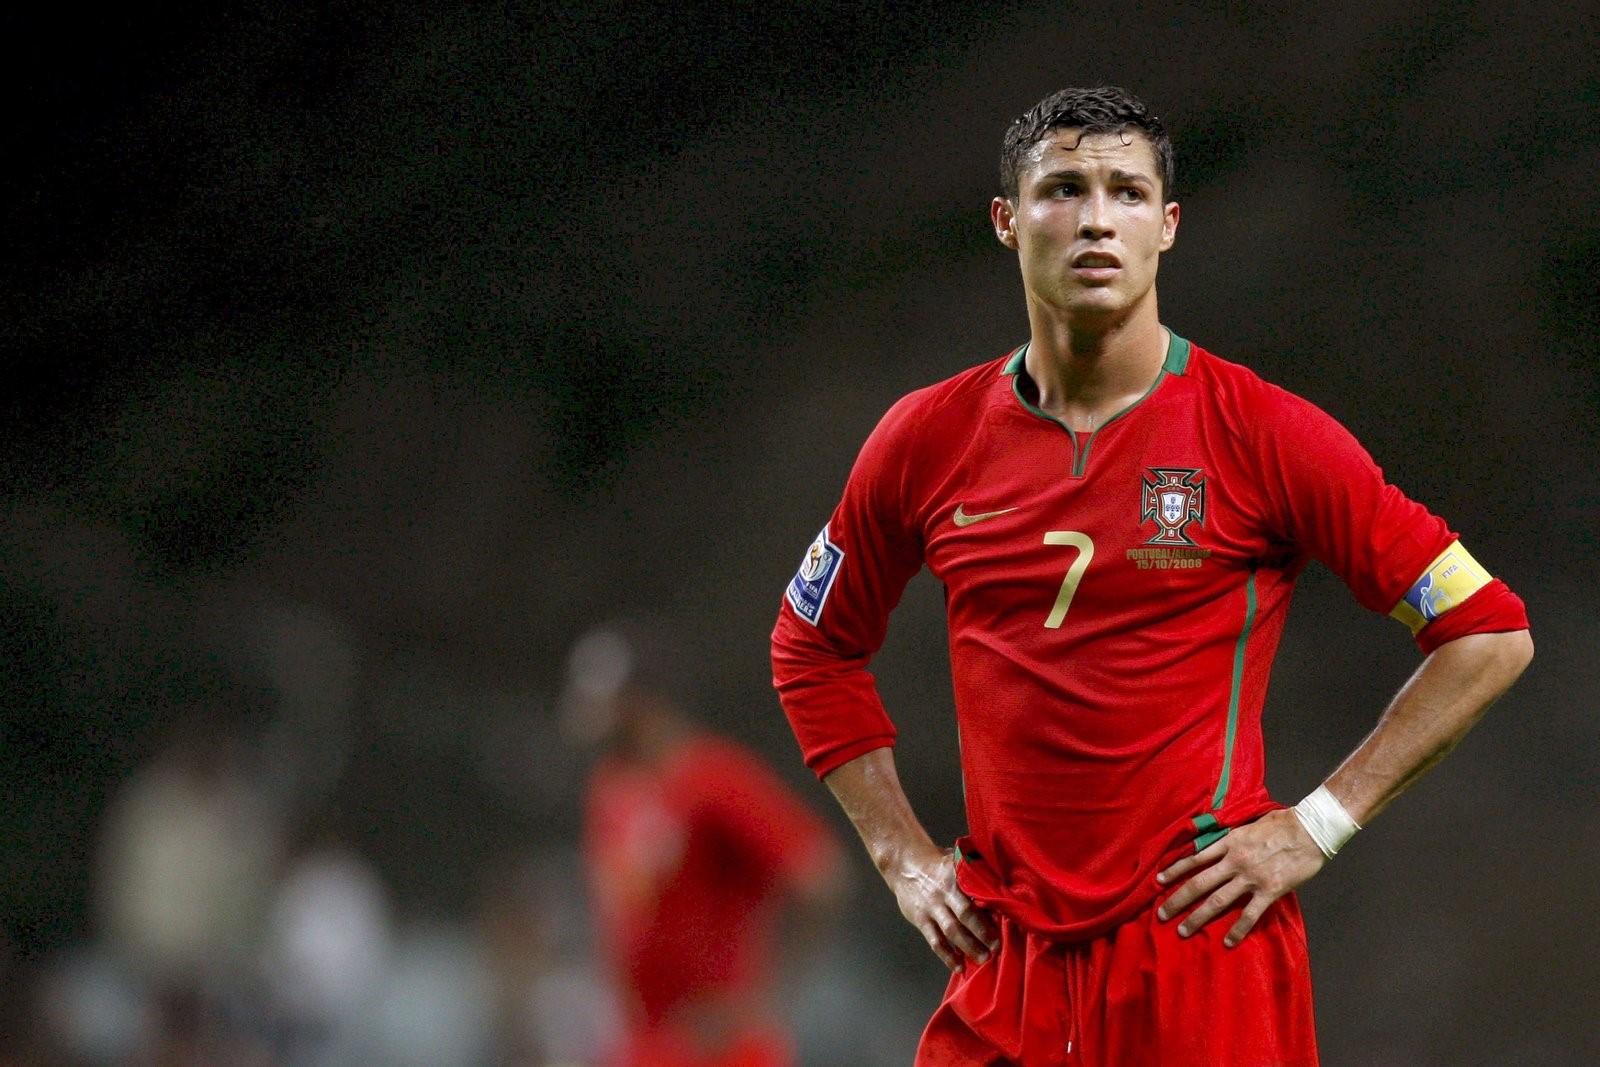  Football Player Cristiano Ronaldo in Red Wallpaper HD Wallpapers 1600x1067